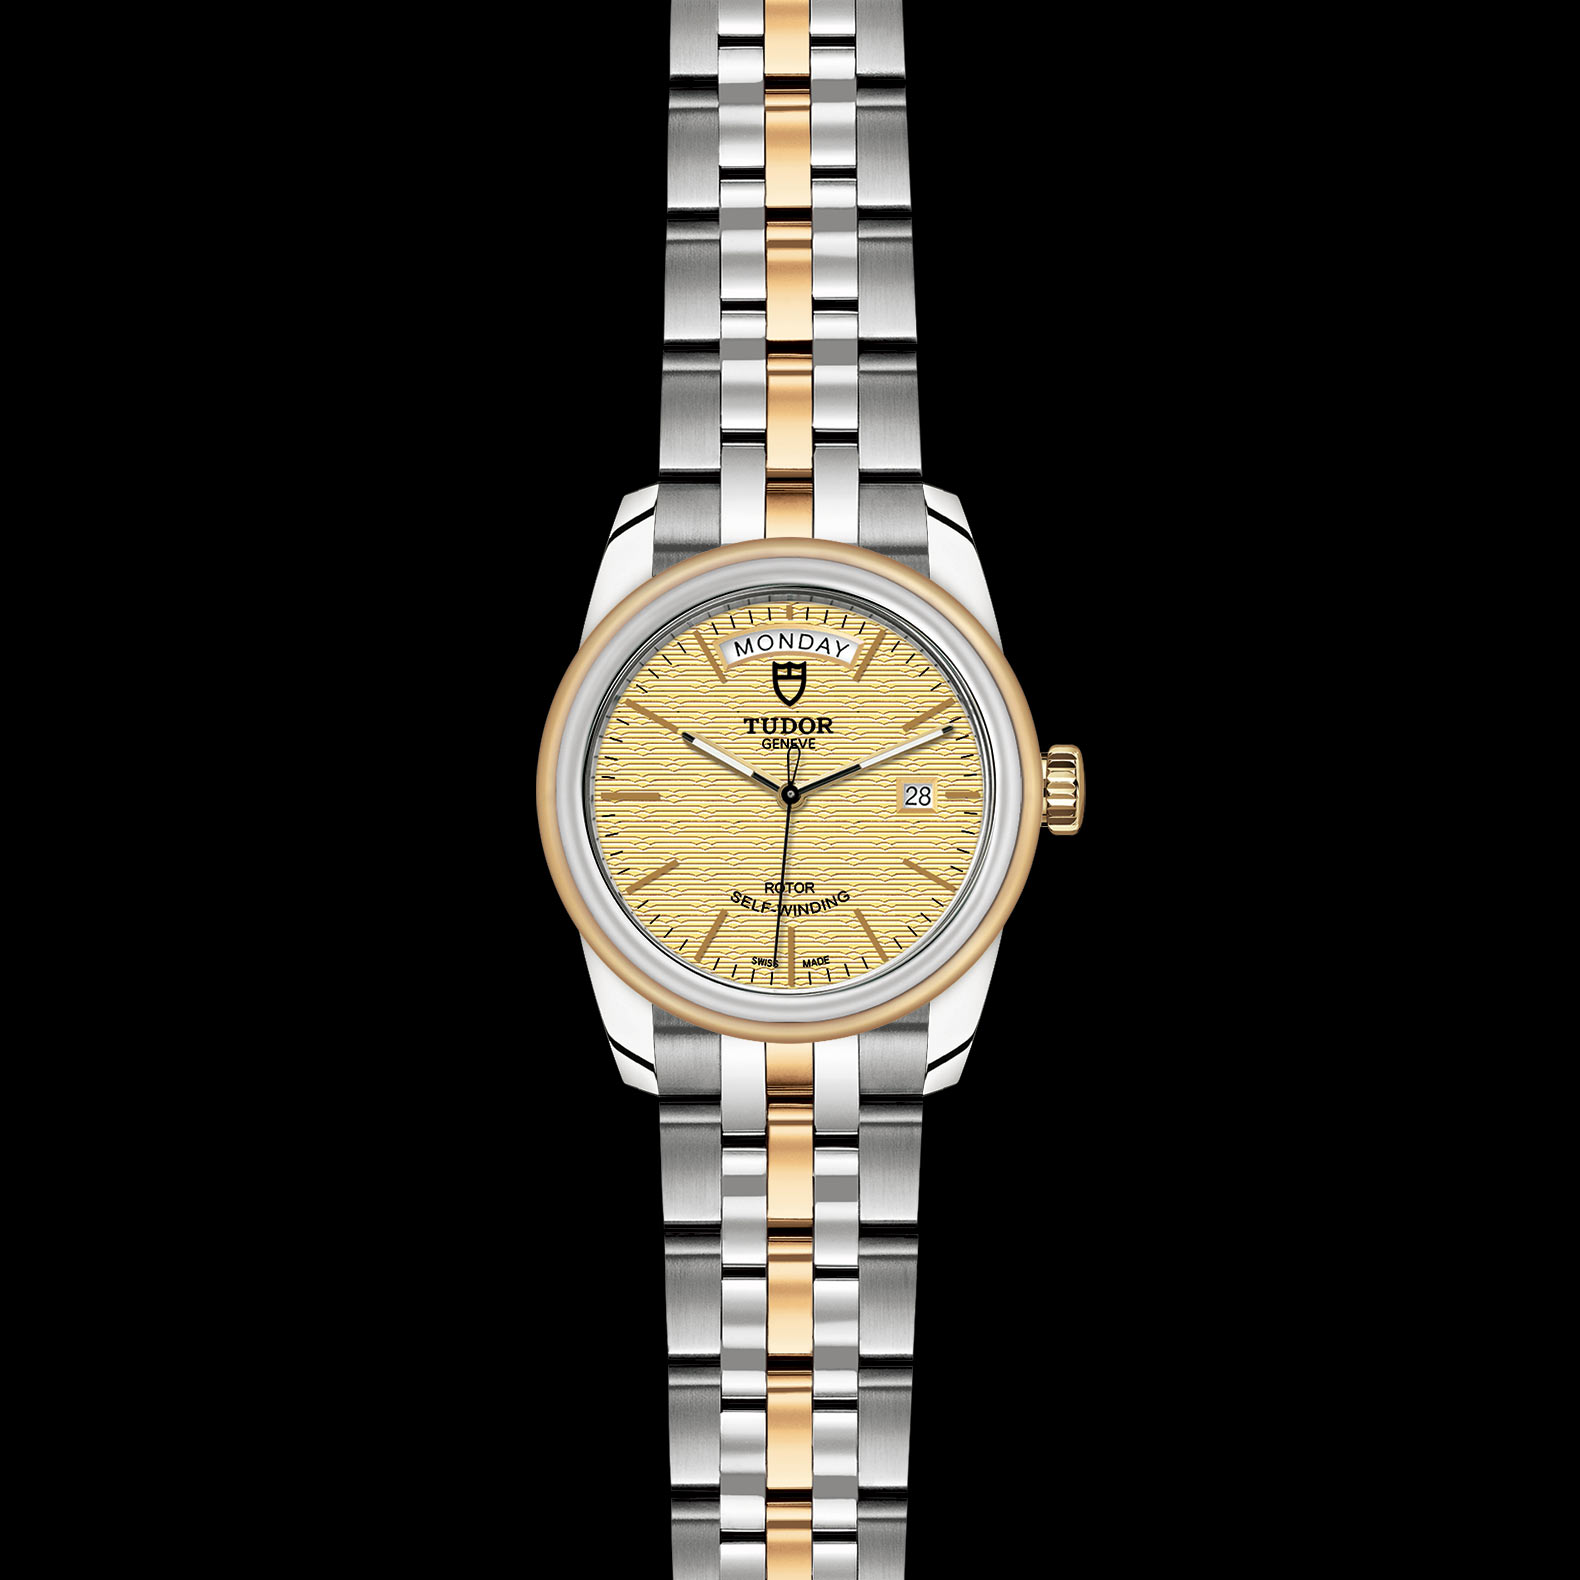 TUDOR Glamour Date+Day - M56003-0003